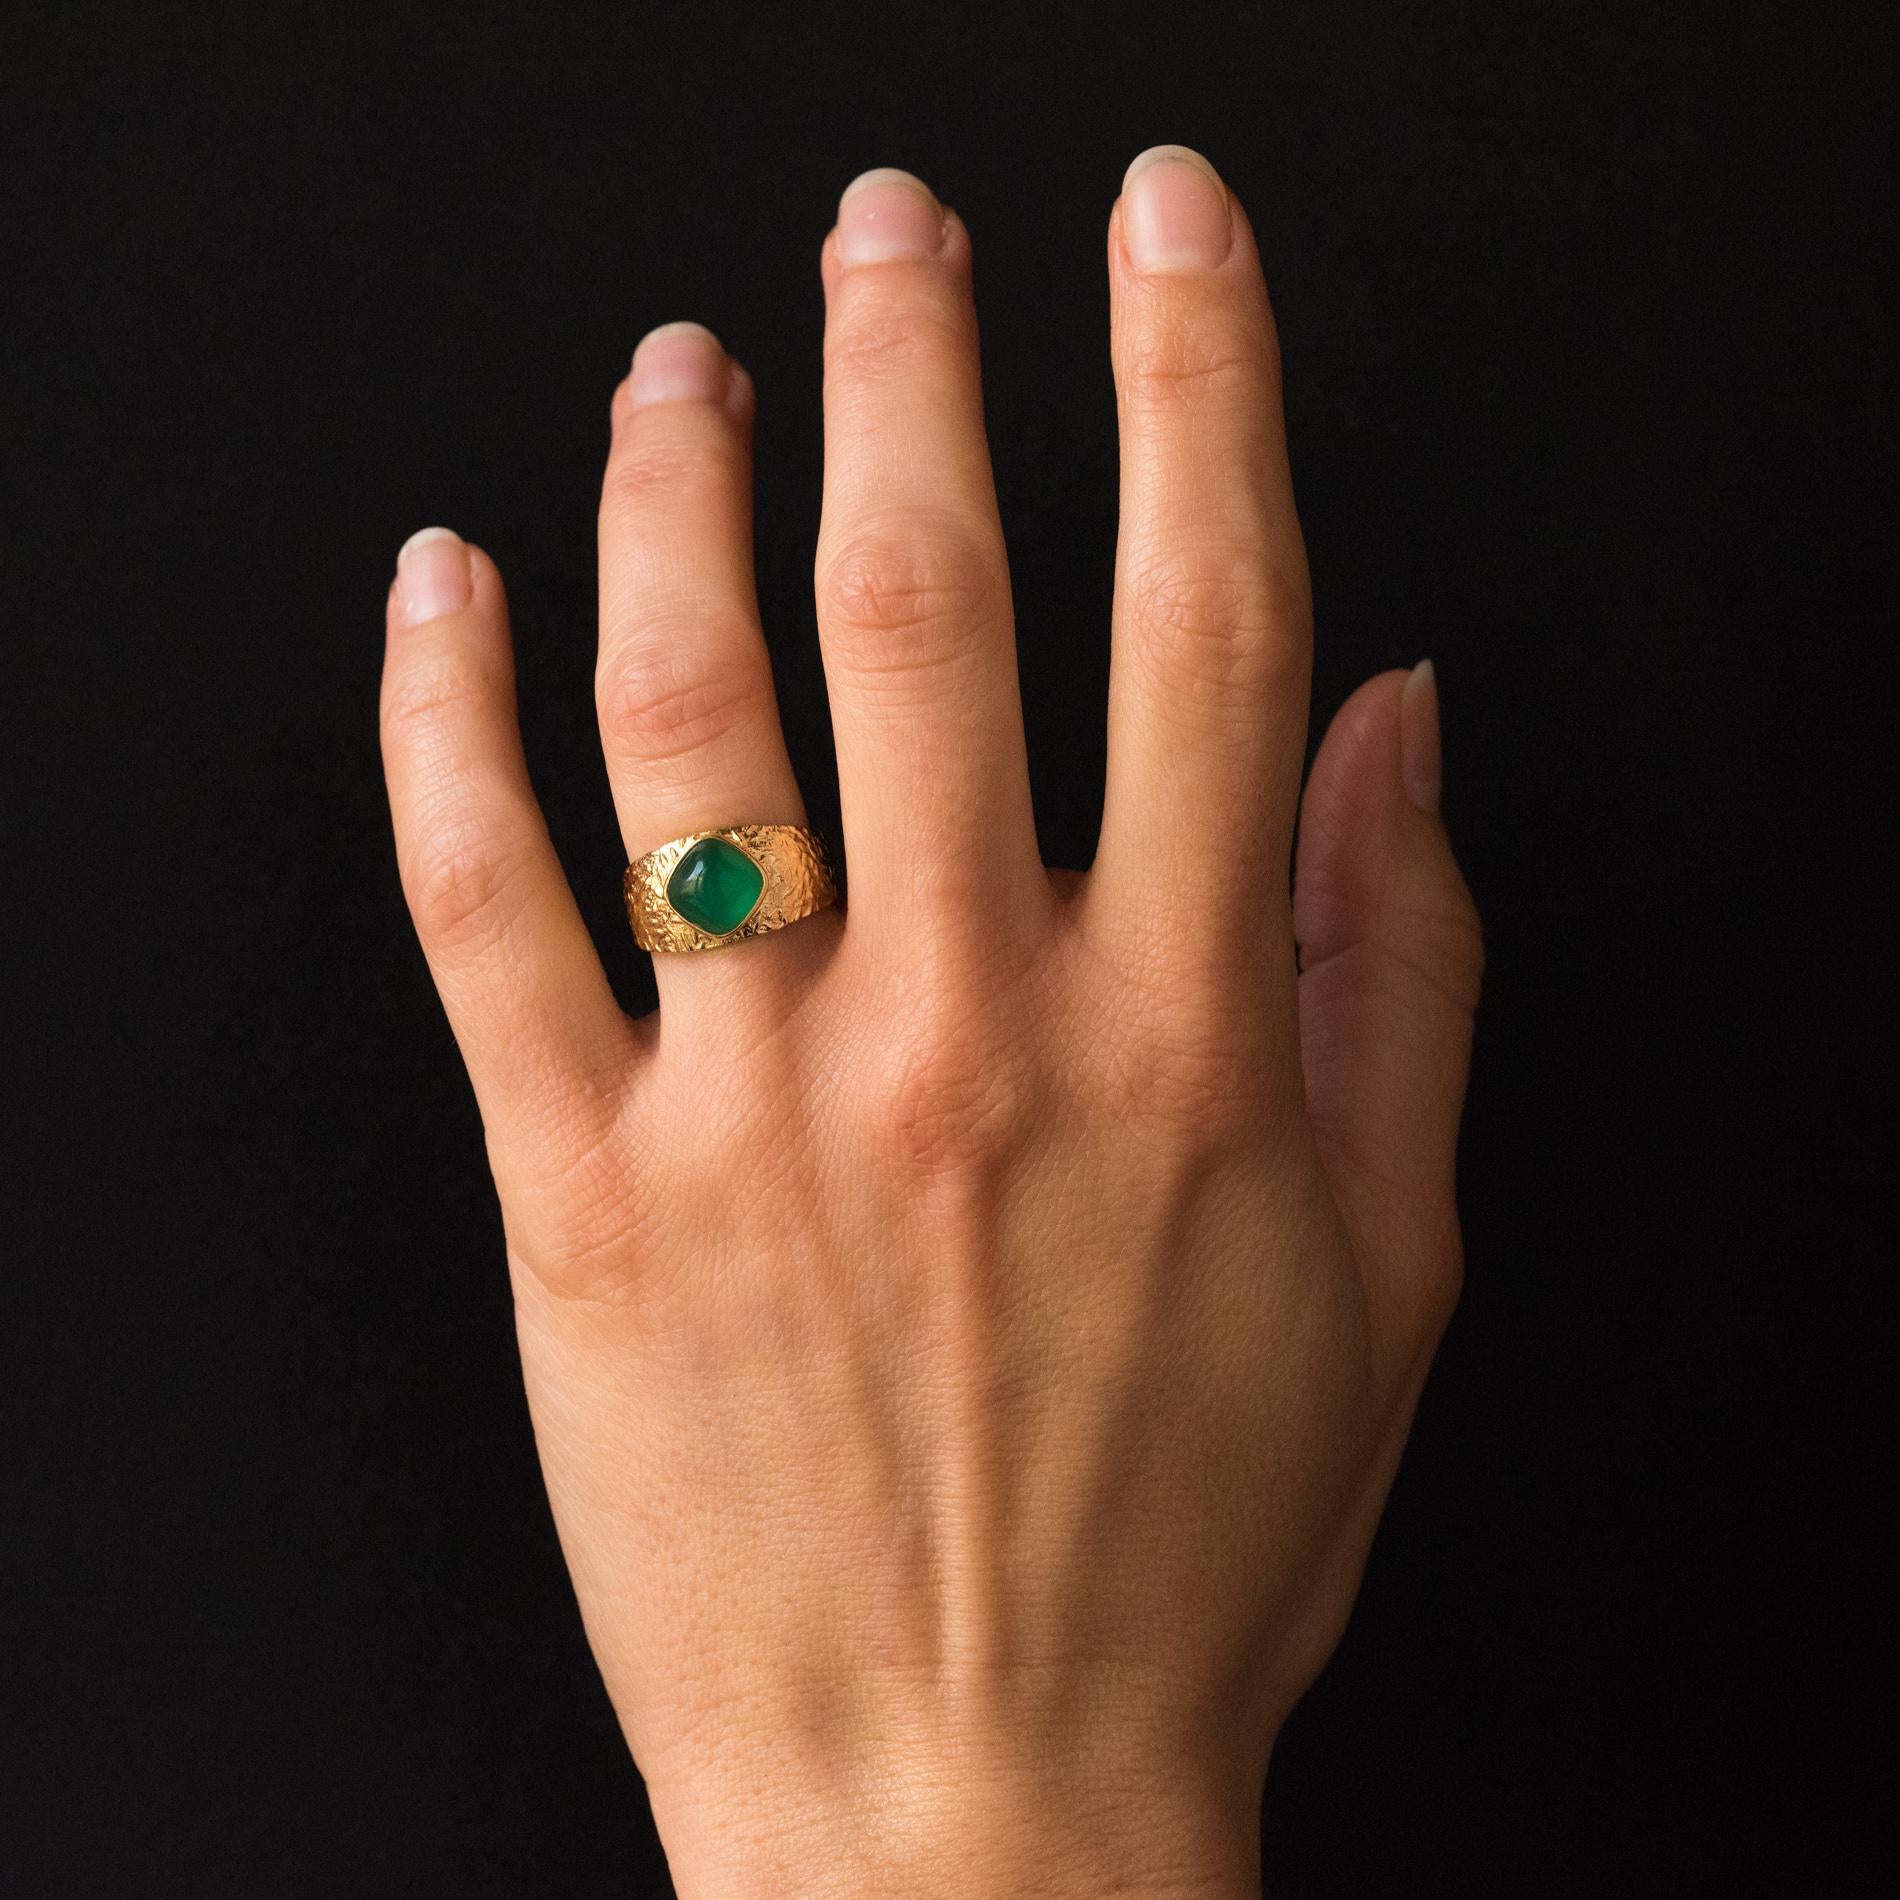 Ring in 18 karat yellow gold.
This retro ring is adorned on the top with a green cabochon agate in a closed setting, surrounded by a carving on the top of the ring.
Agate total weight: about 1.85 carat.
Height: 10.2 mm, width: 9.5 mm, thickness: